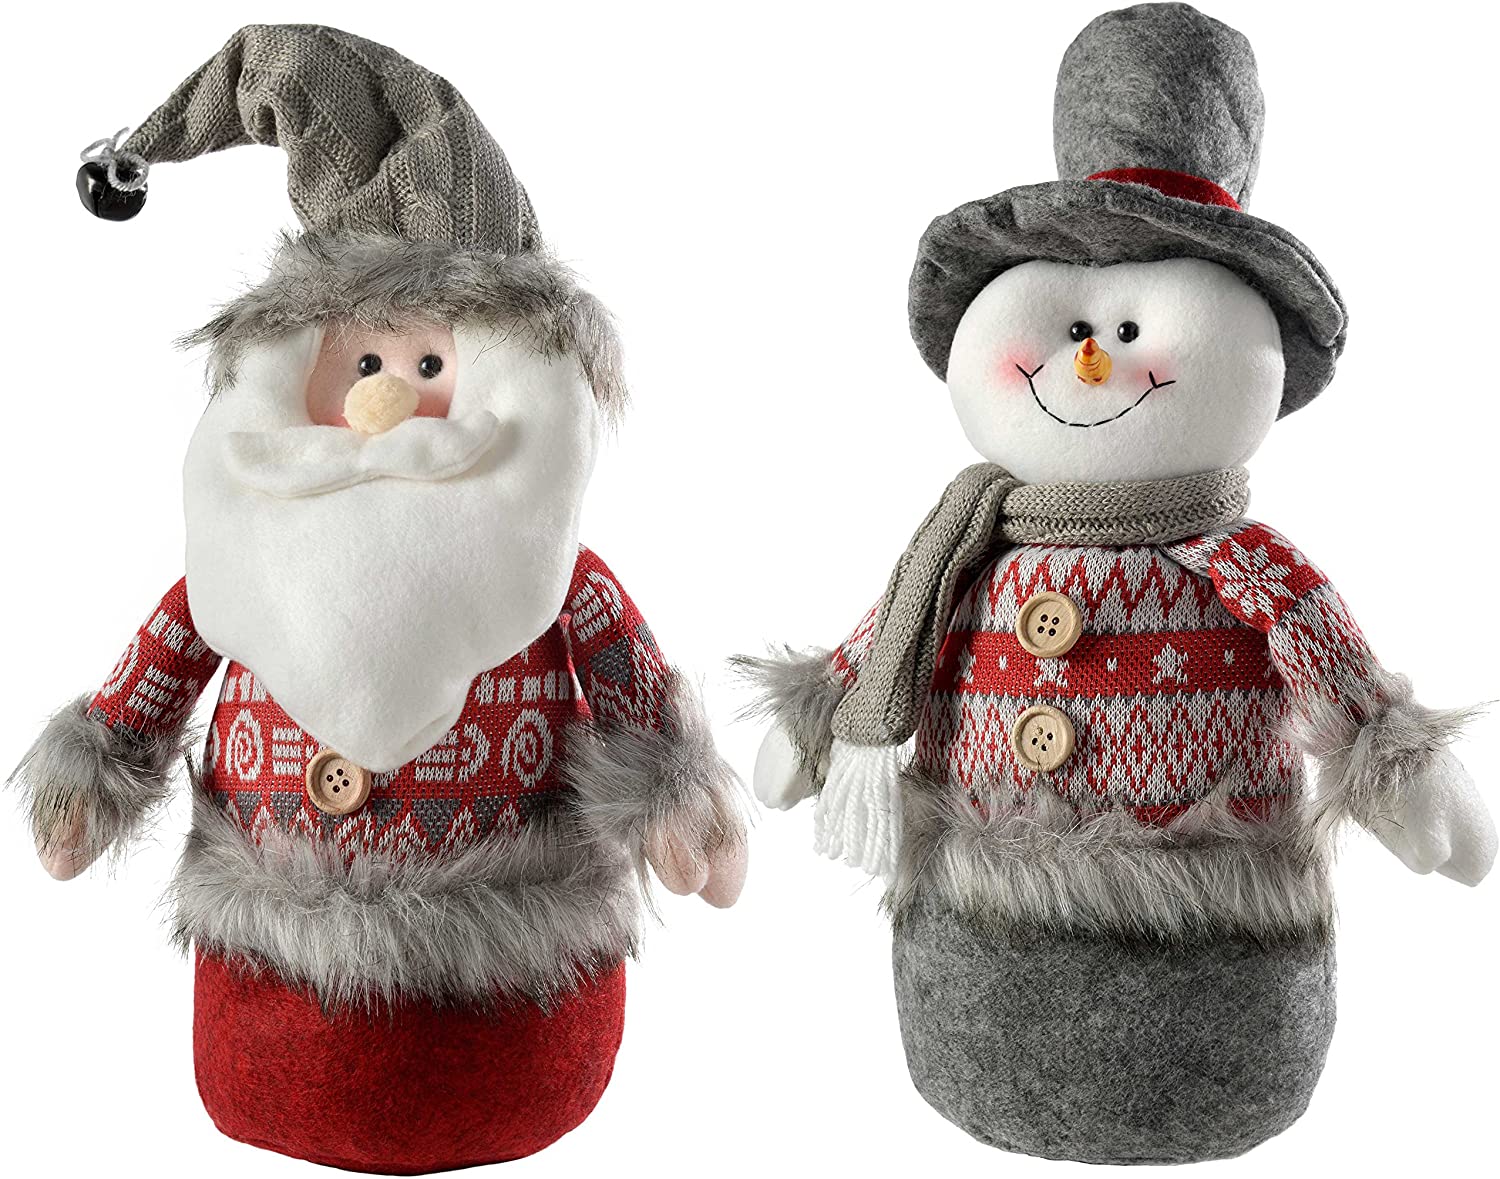 WeRChristmas 25 cm Santa Snowman Christmas Table Decorations – Grey/Red (Pack of 2)